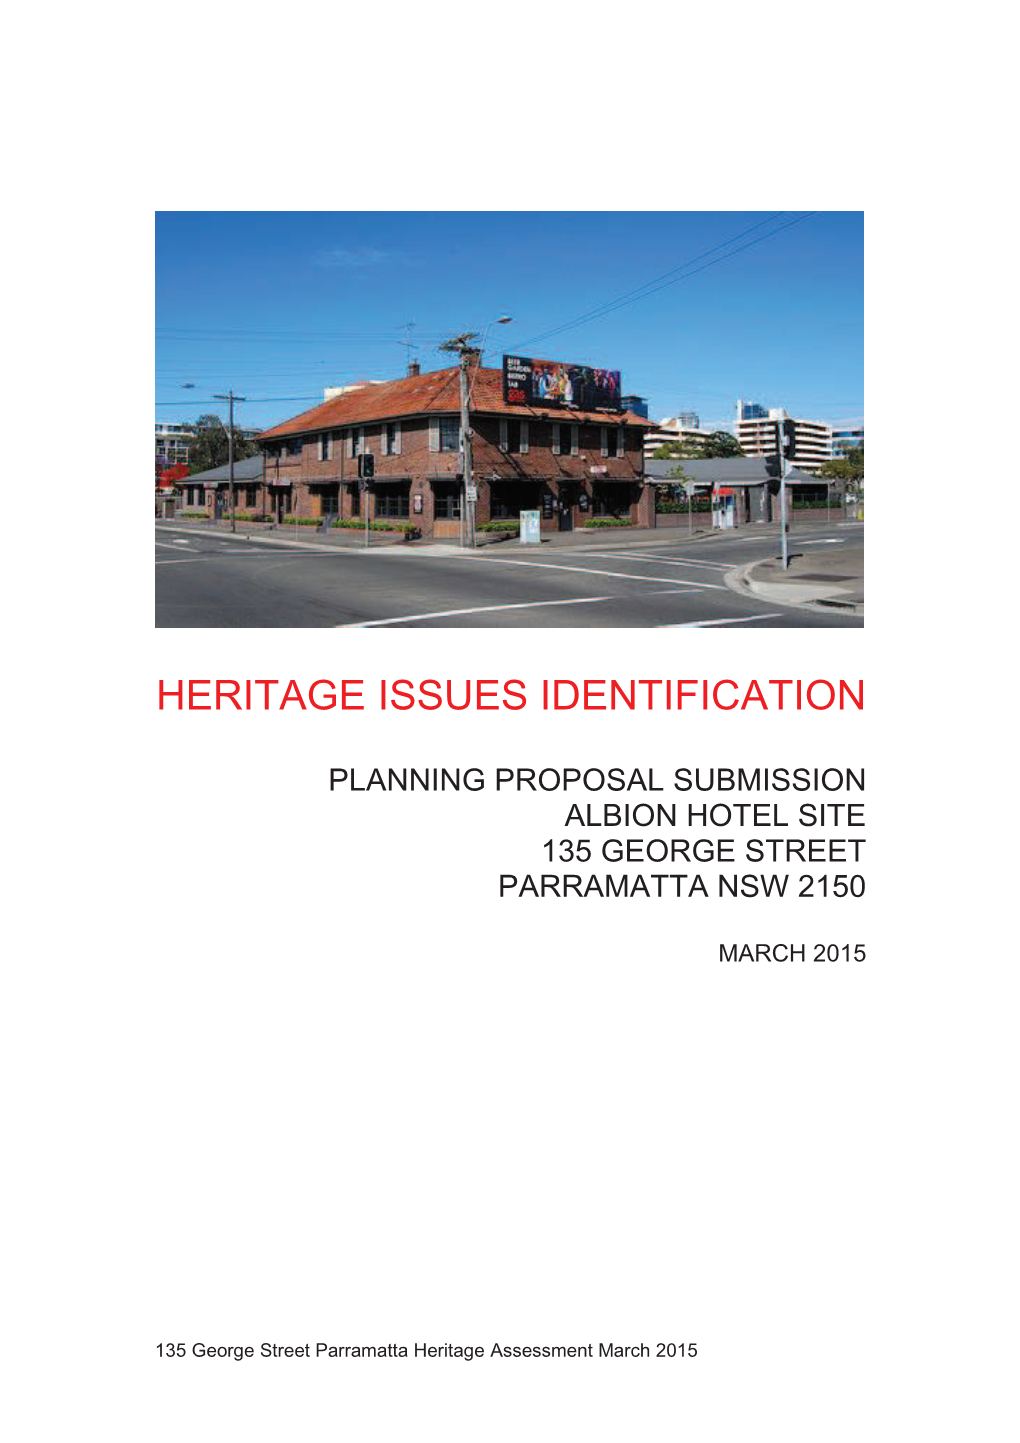 Heritage Issues Identification